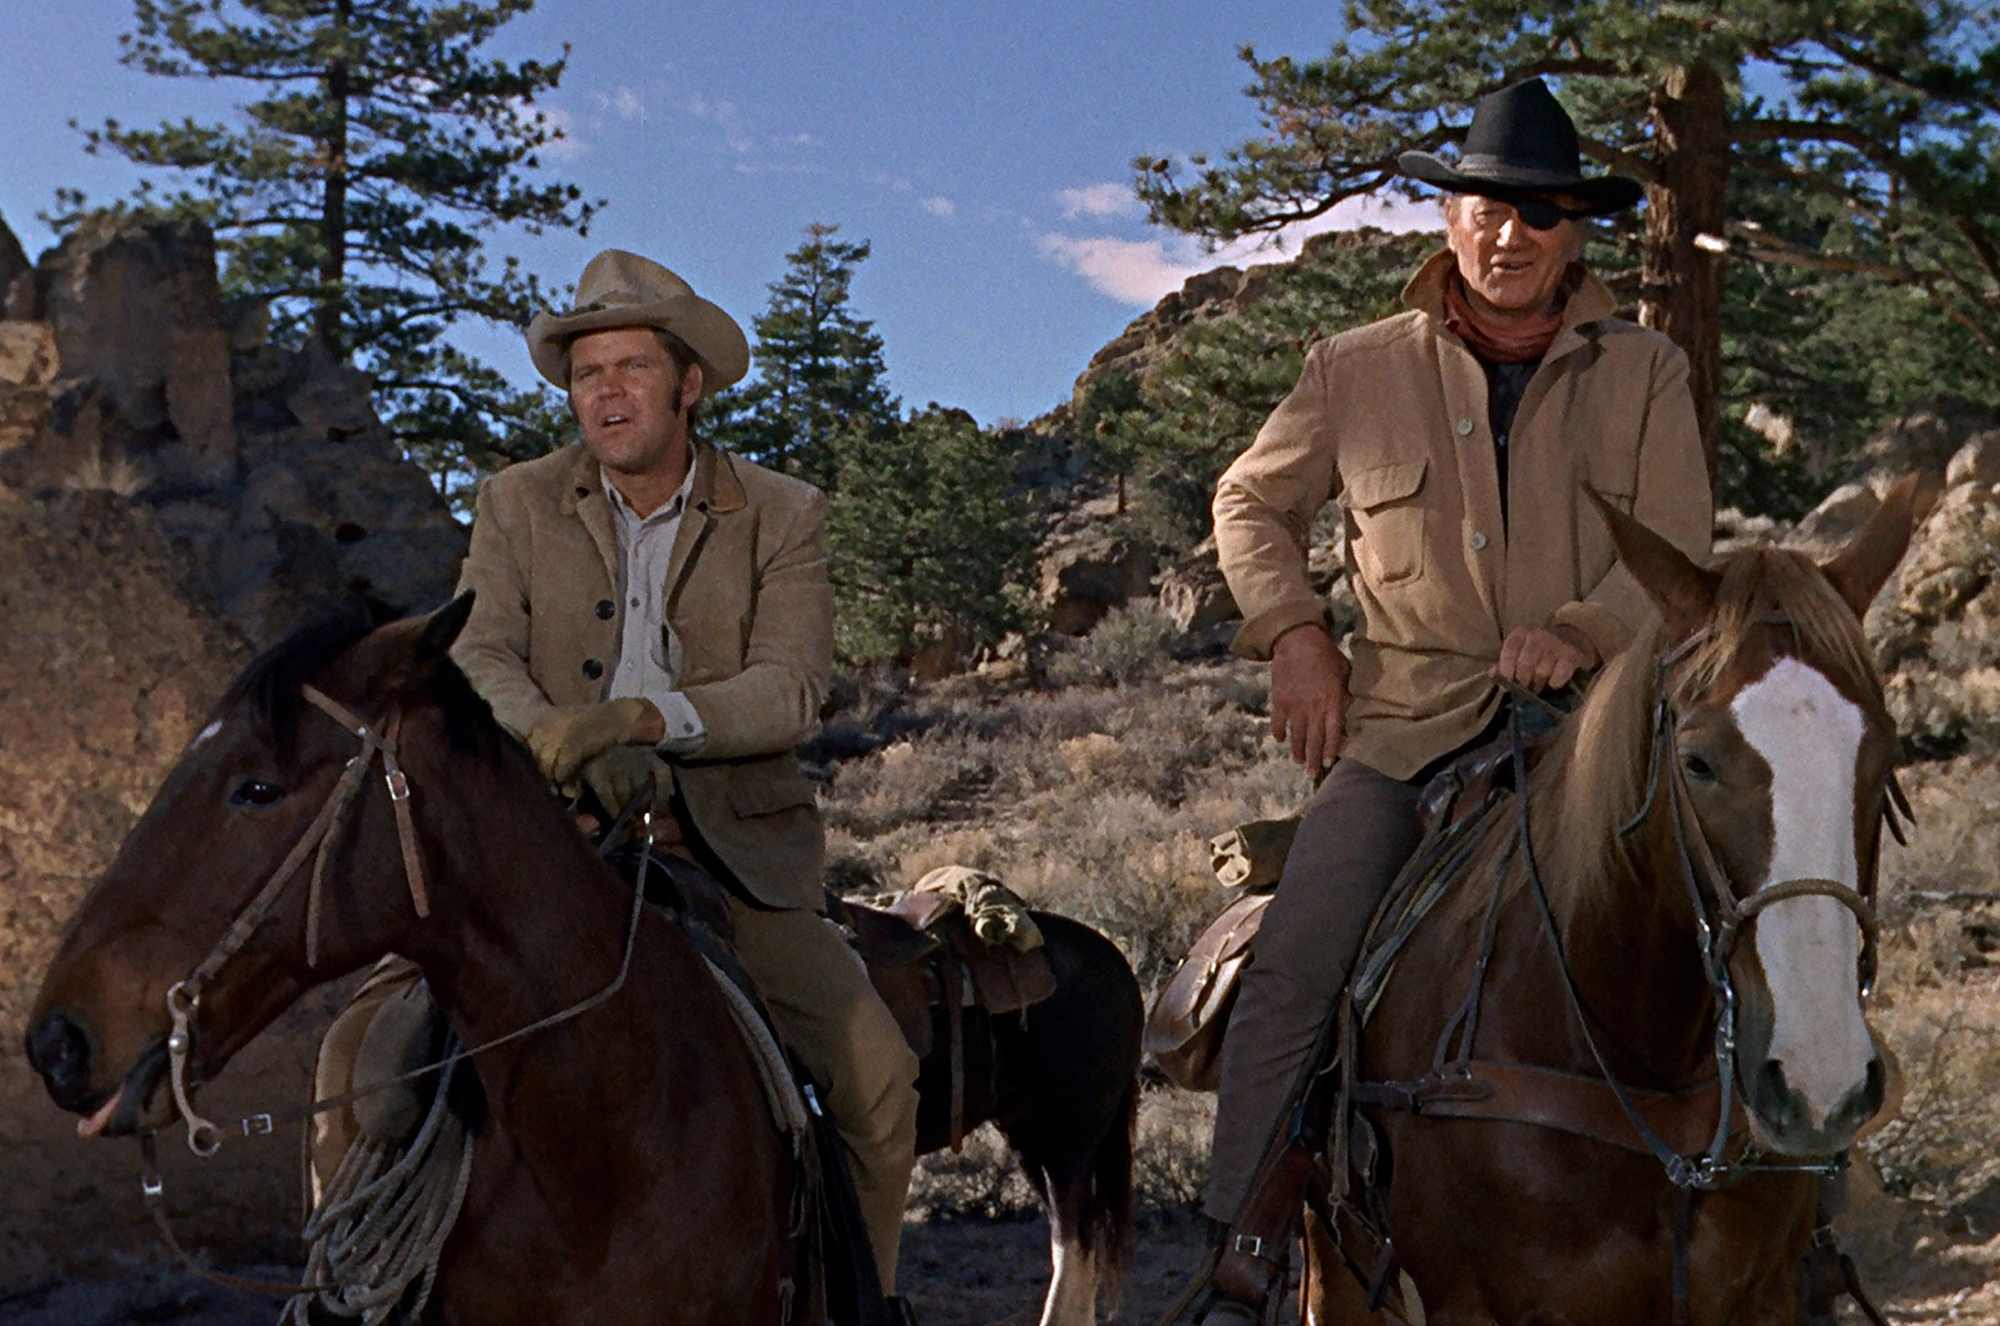 'True Grit' John Wayne as Rooster Cogburn and Glen Campbell as La Boeuf, each on a horse, standing in front of a mountain. Wayne has his hand on his waist.